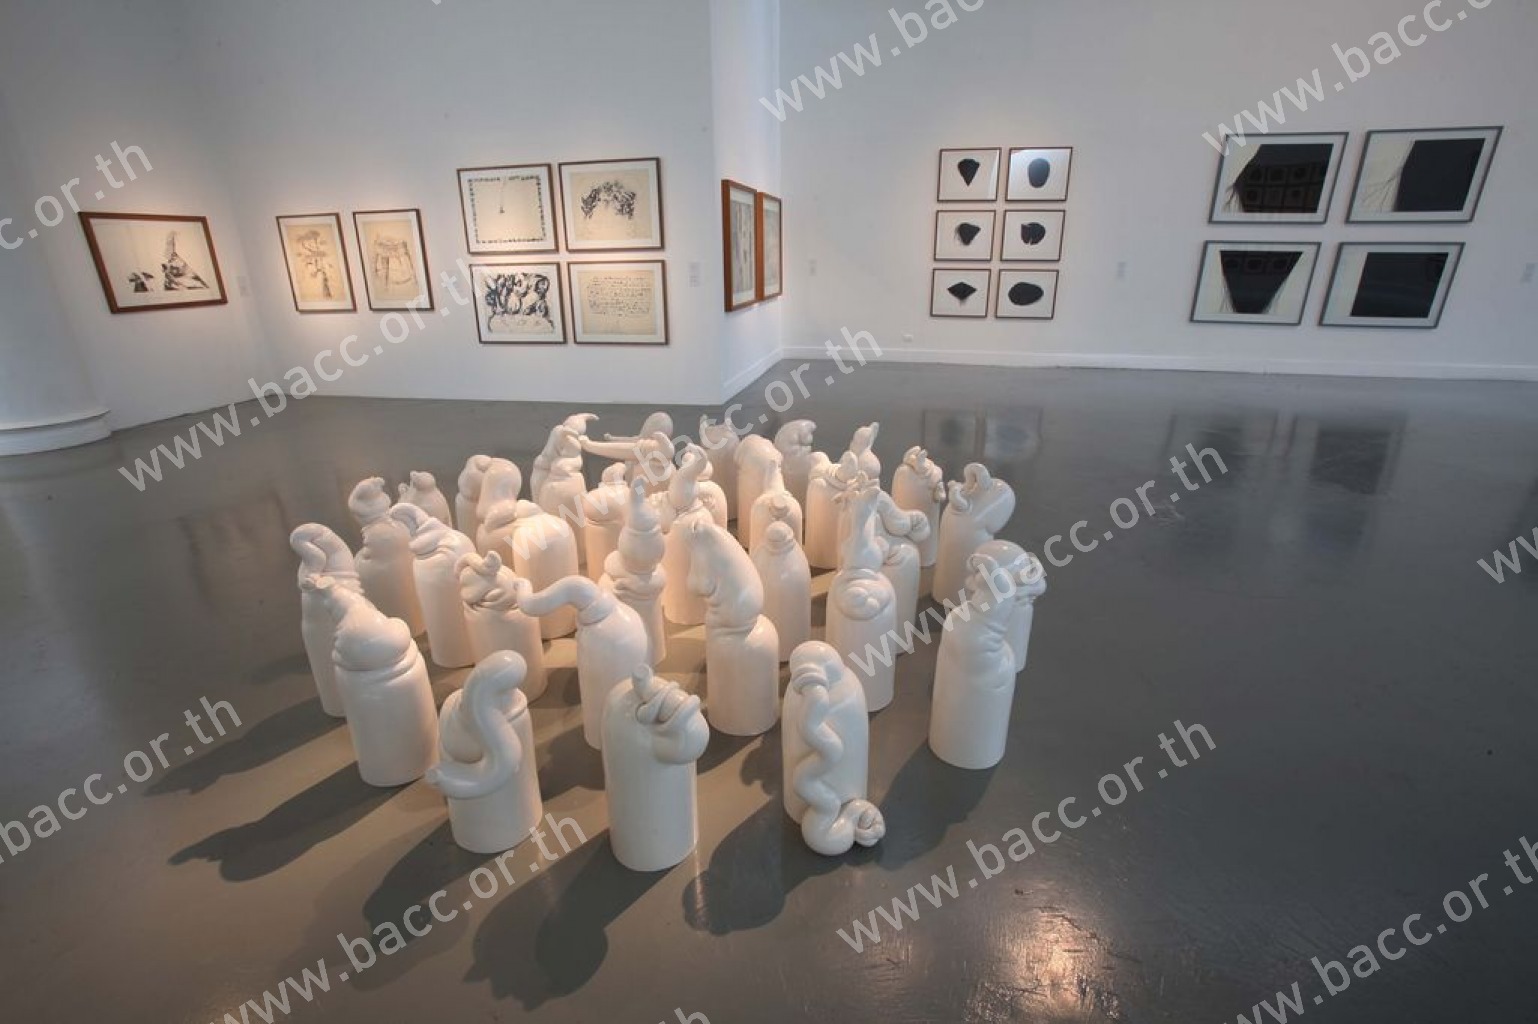 Thai Cartoons and abstract illustration exhibition